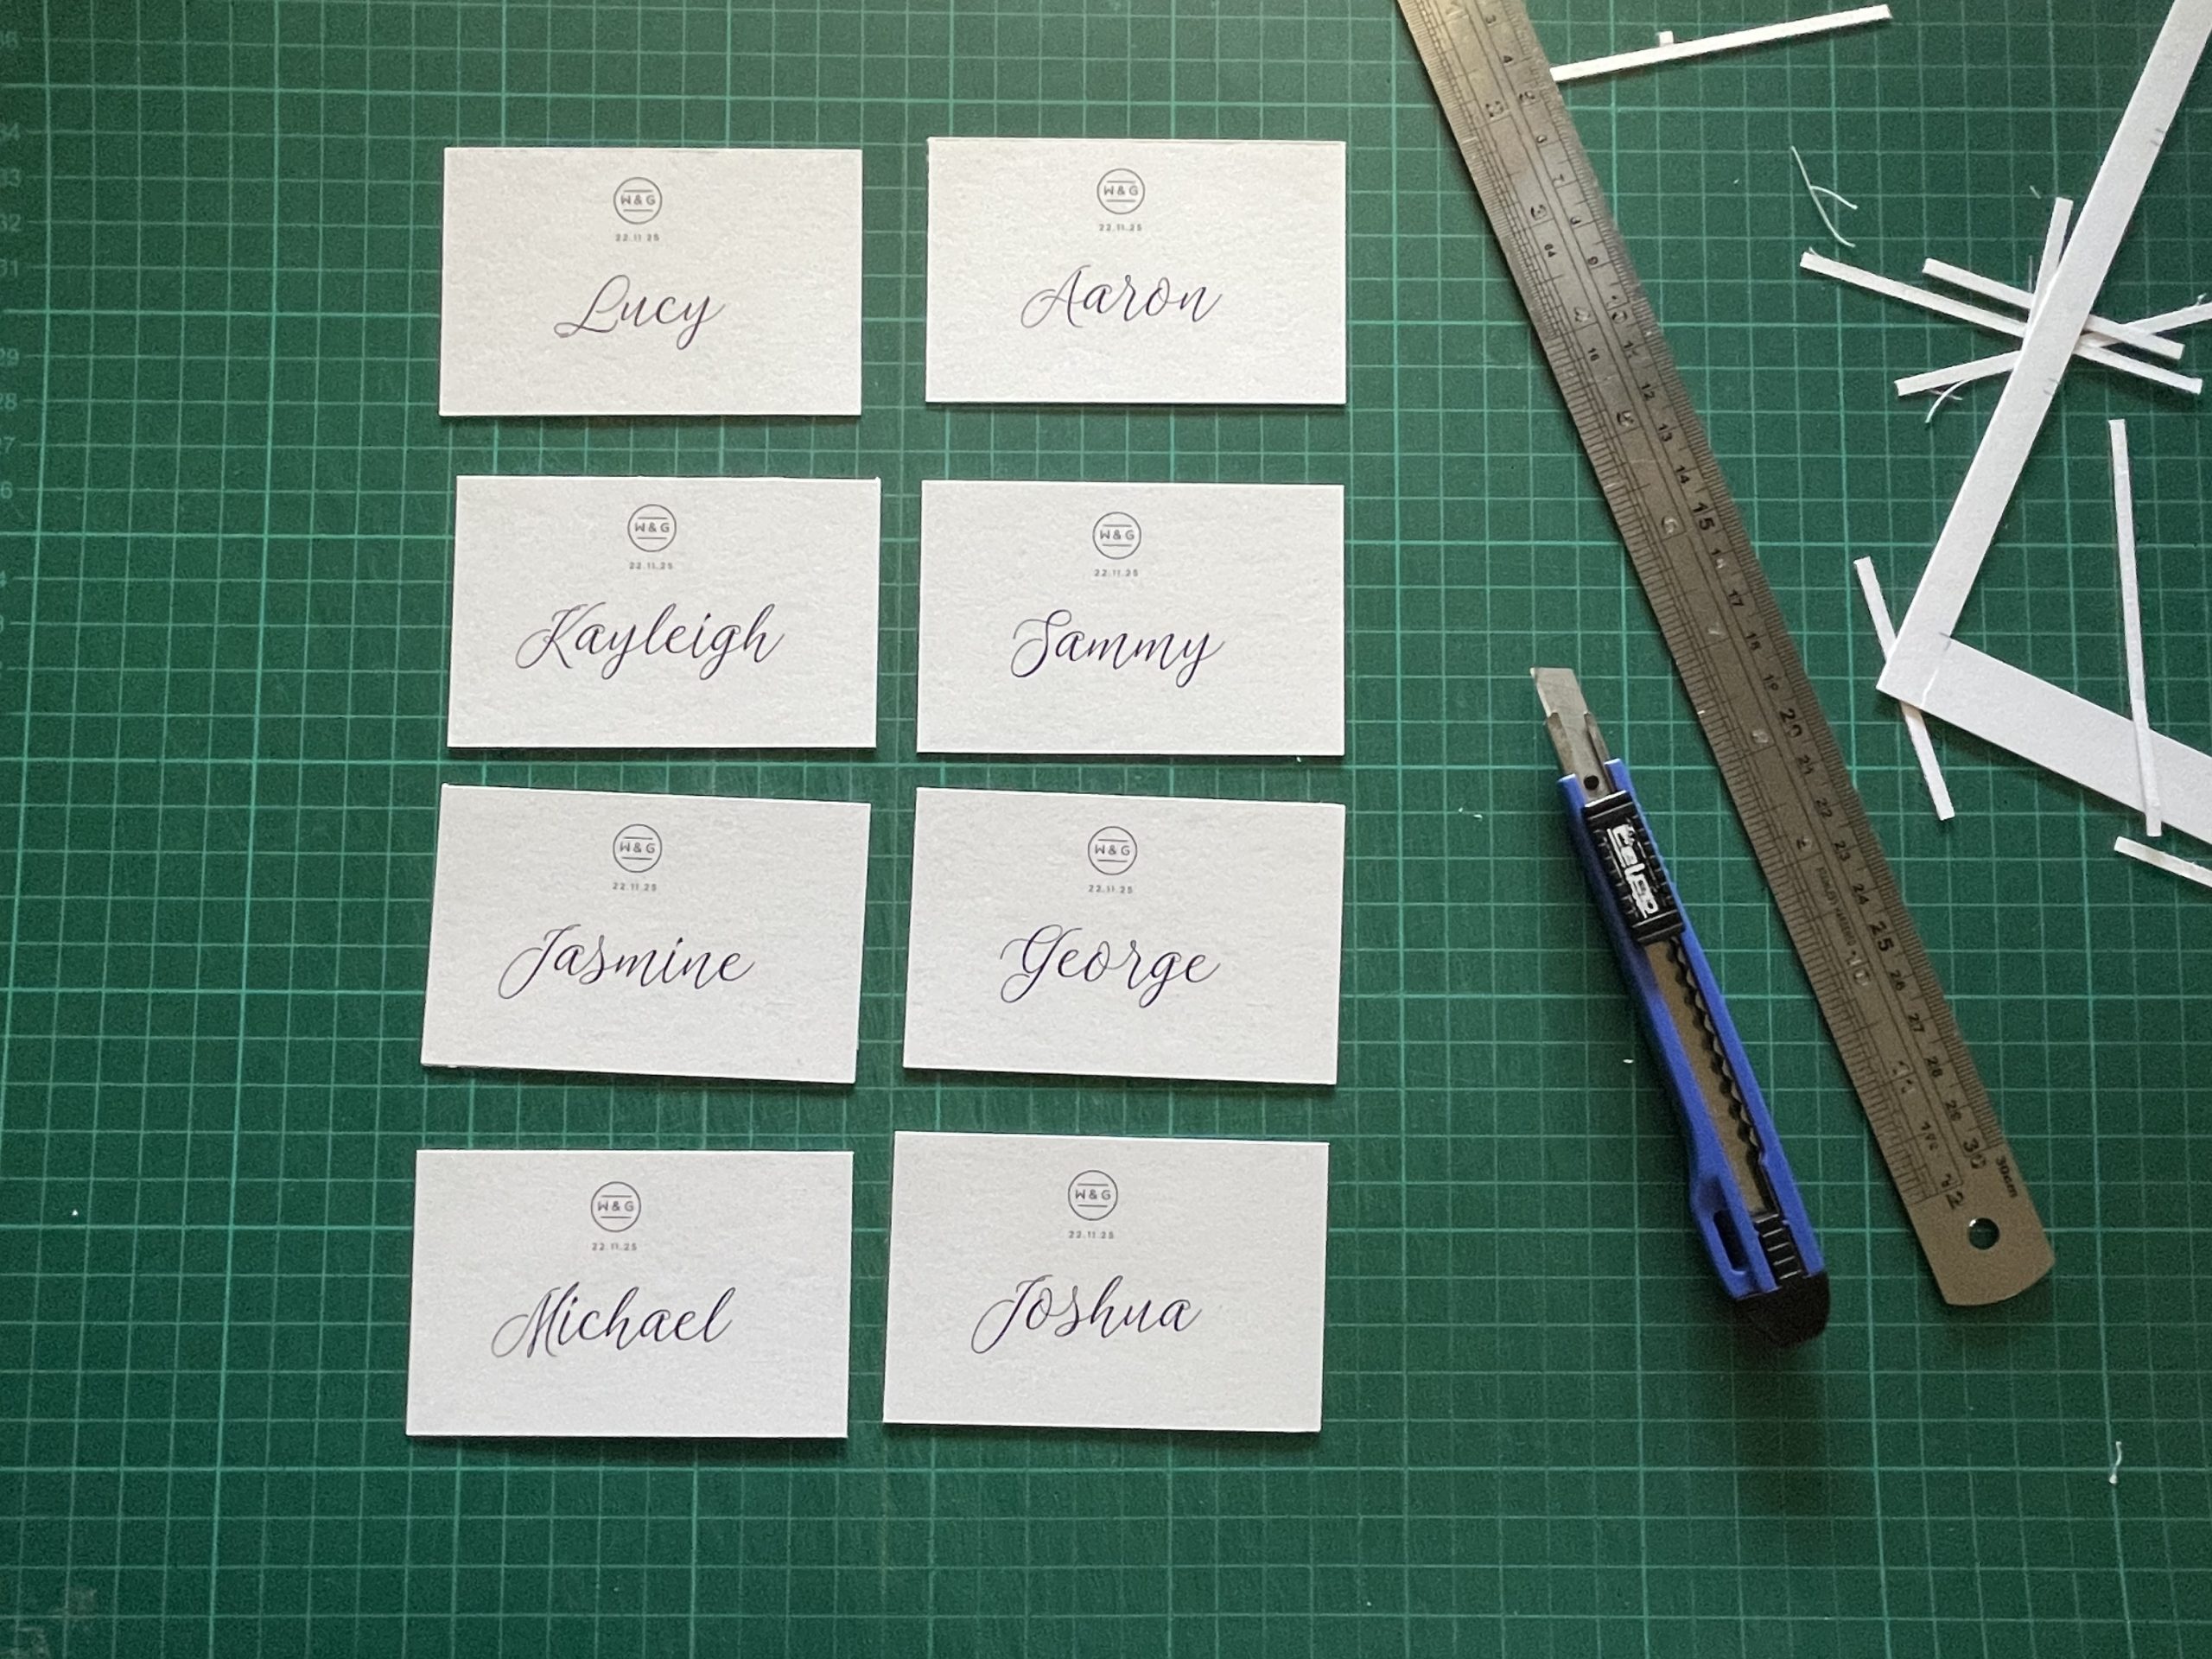 Place cards that have been cut out from a piece of paper